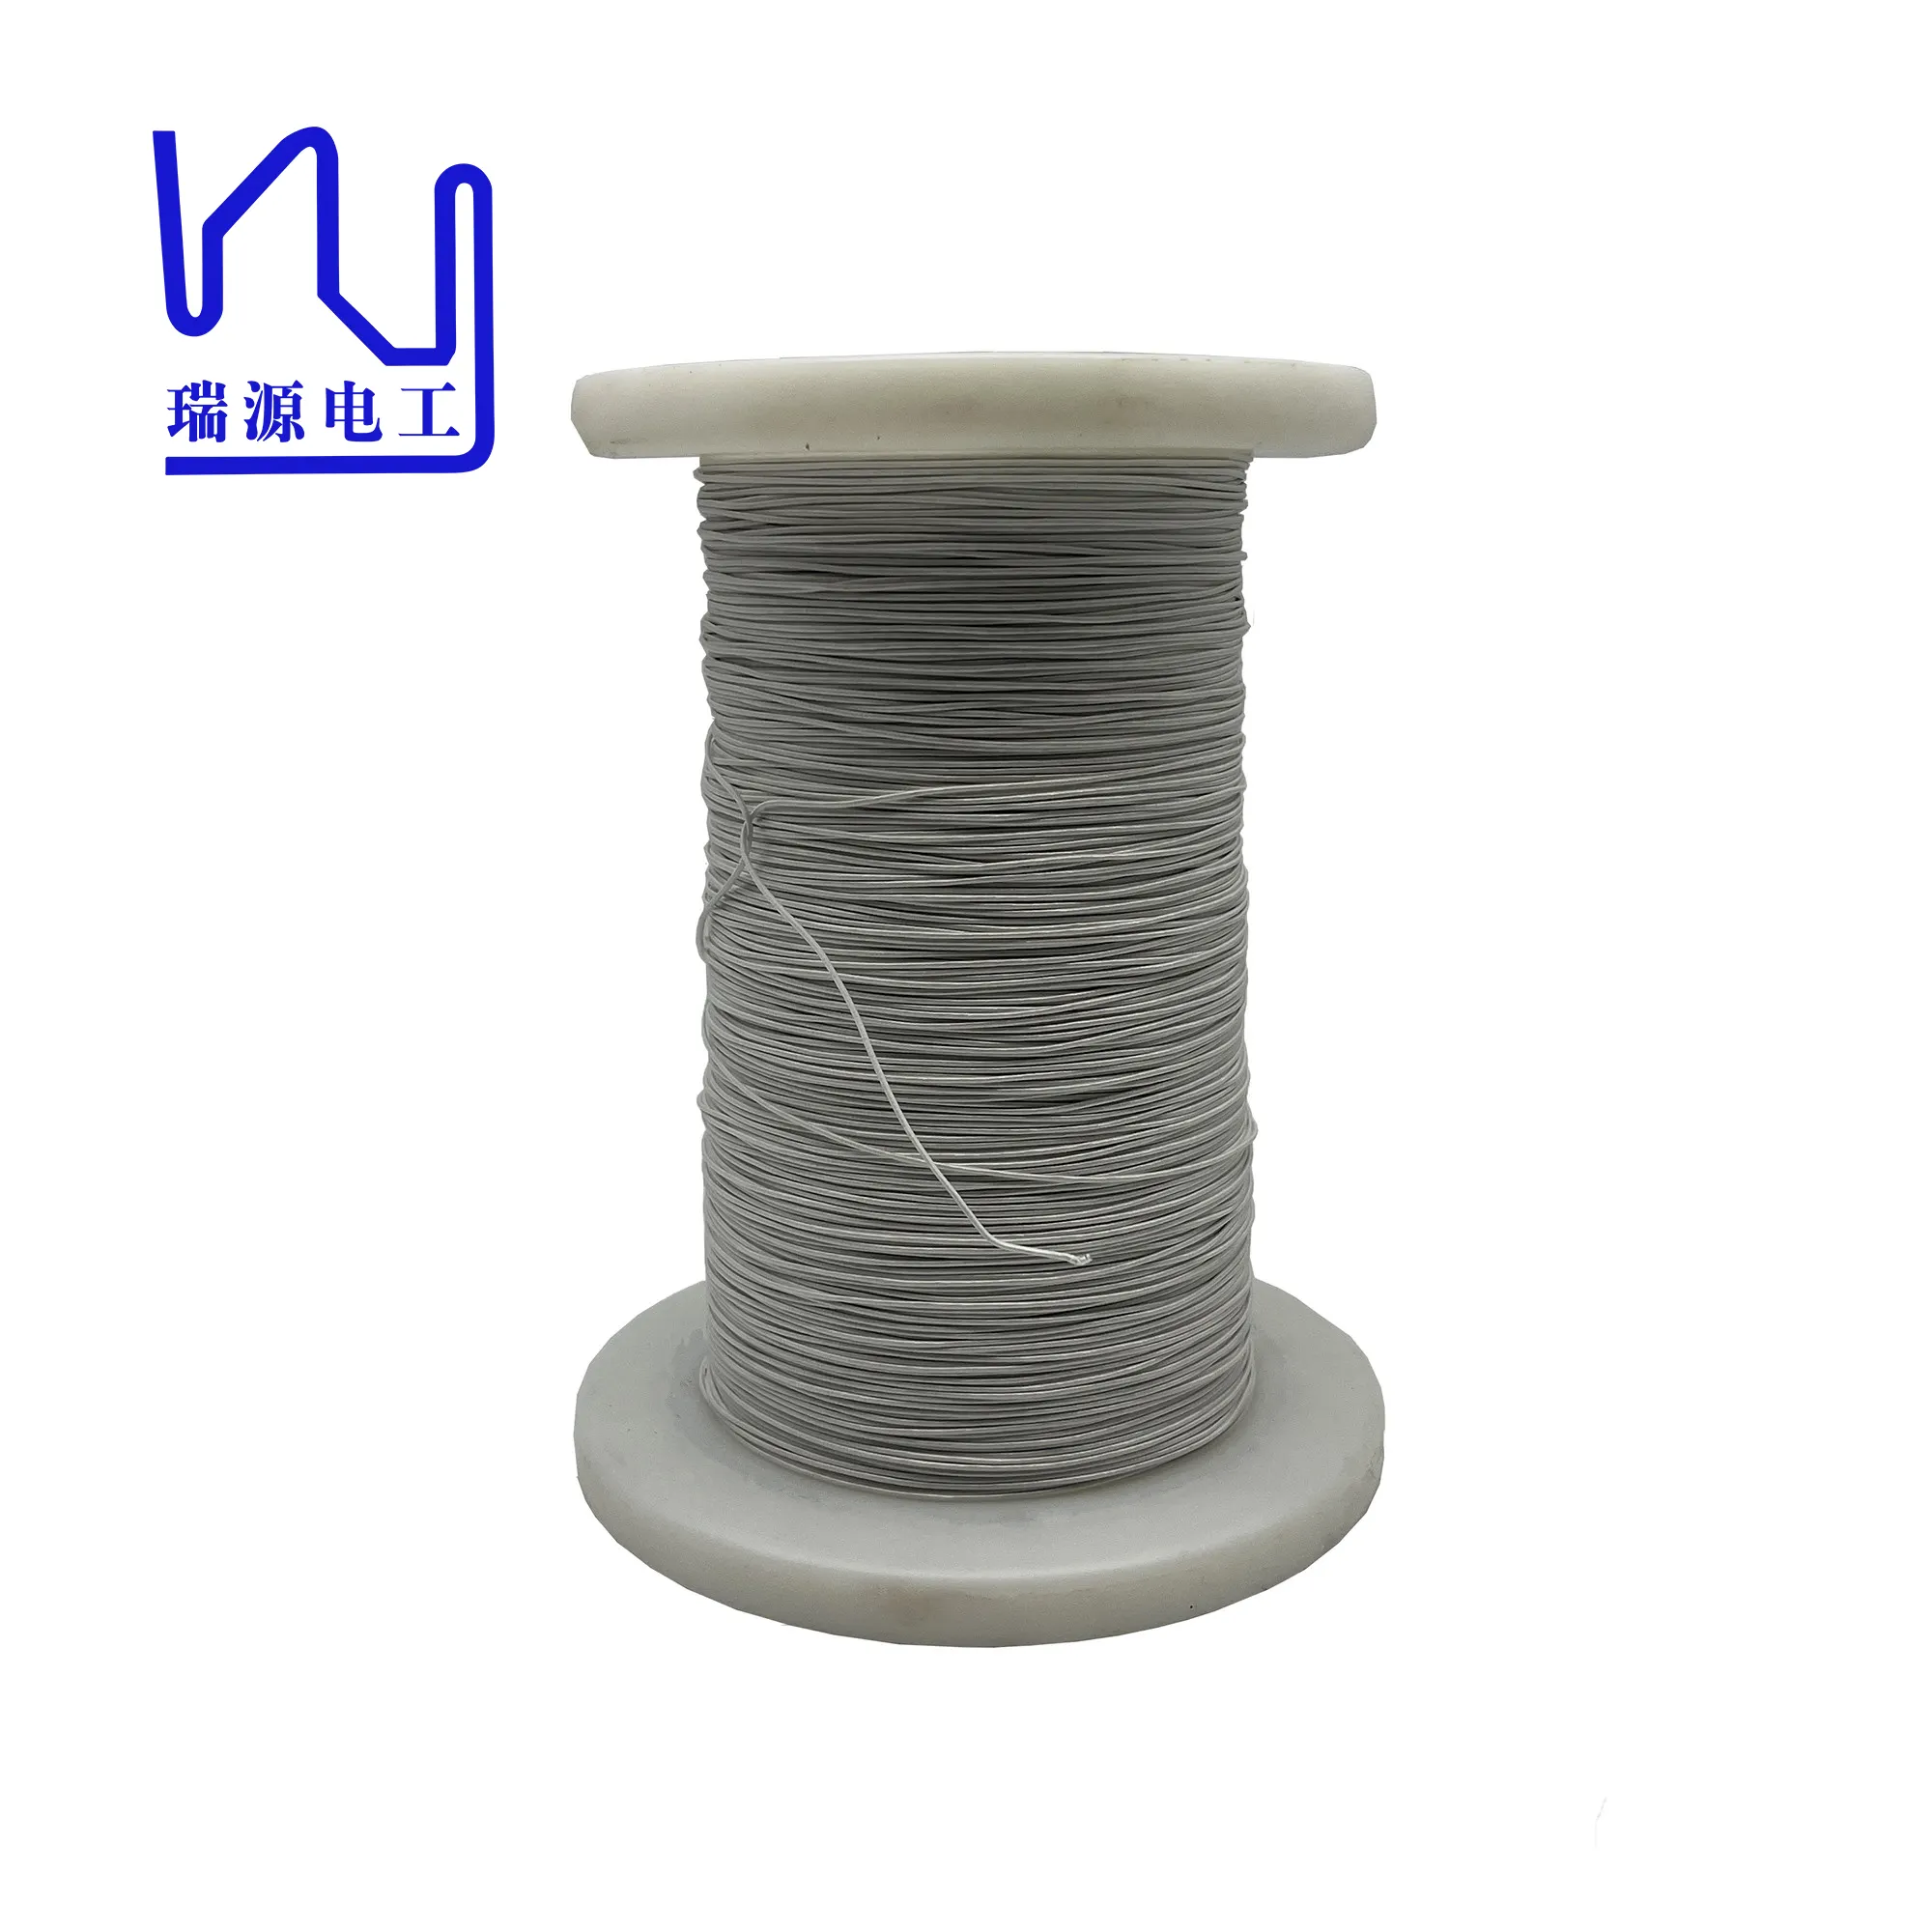 High-quality 0.1X65 Yarn Wrapped Pure Silver Twisted Litz Wire for Audio Cable